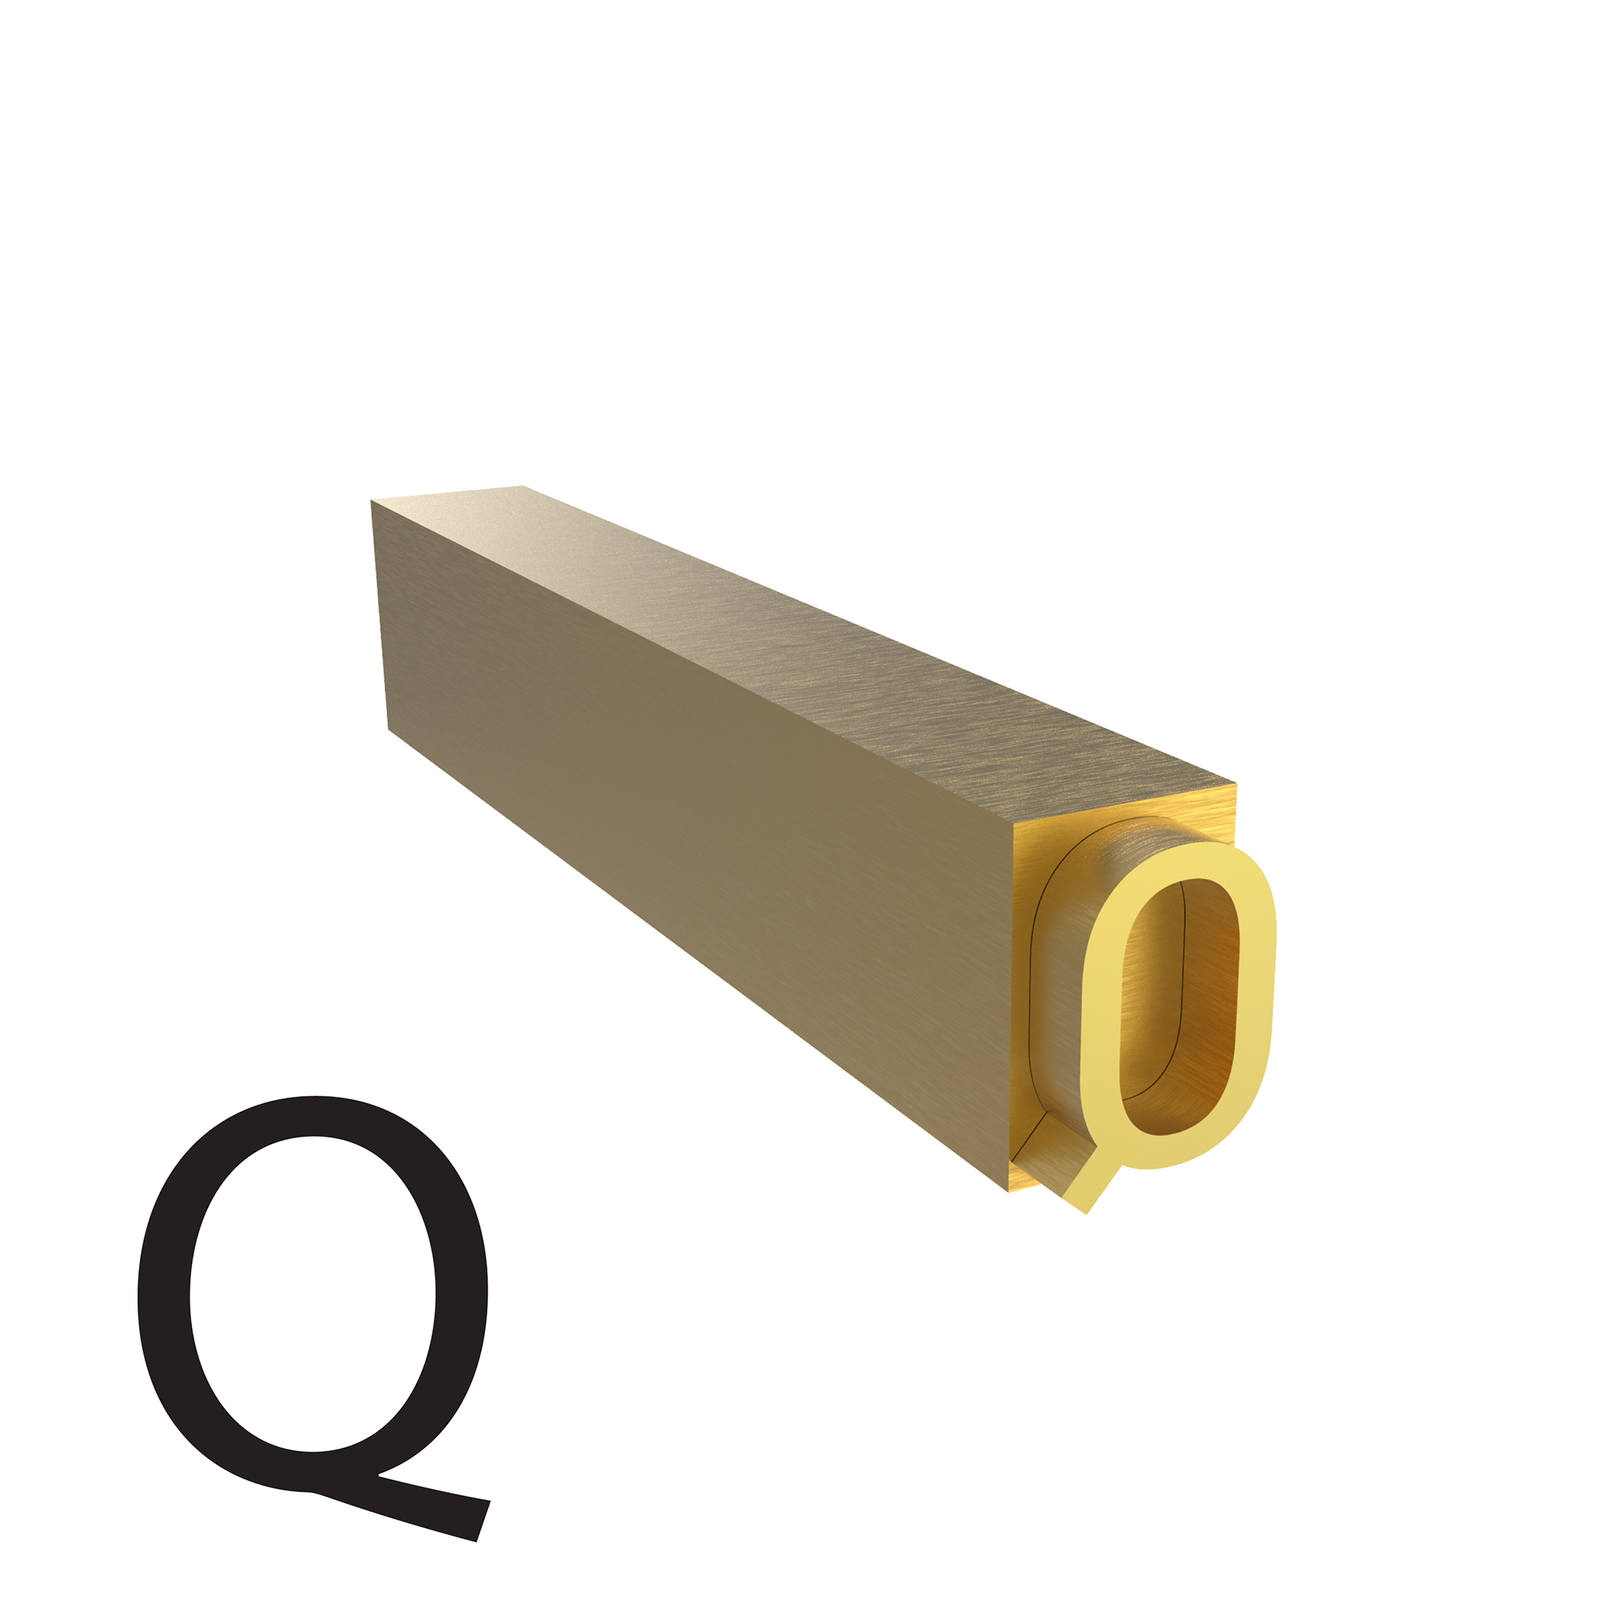 4mm hot stamp letter Q type used for coders and printers